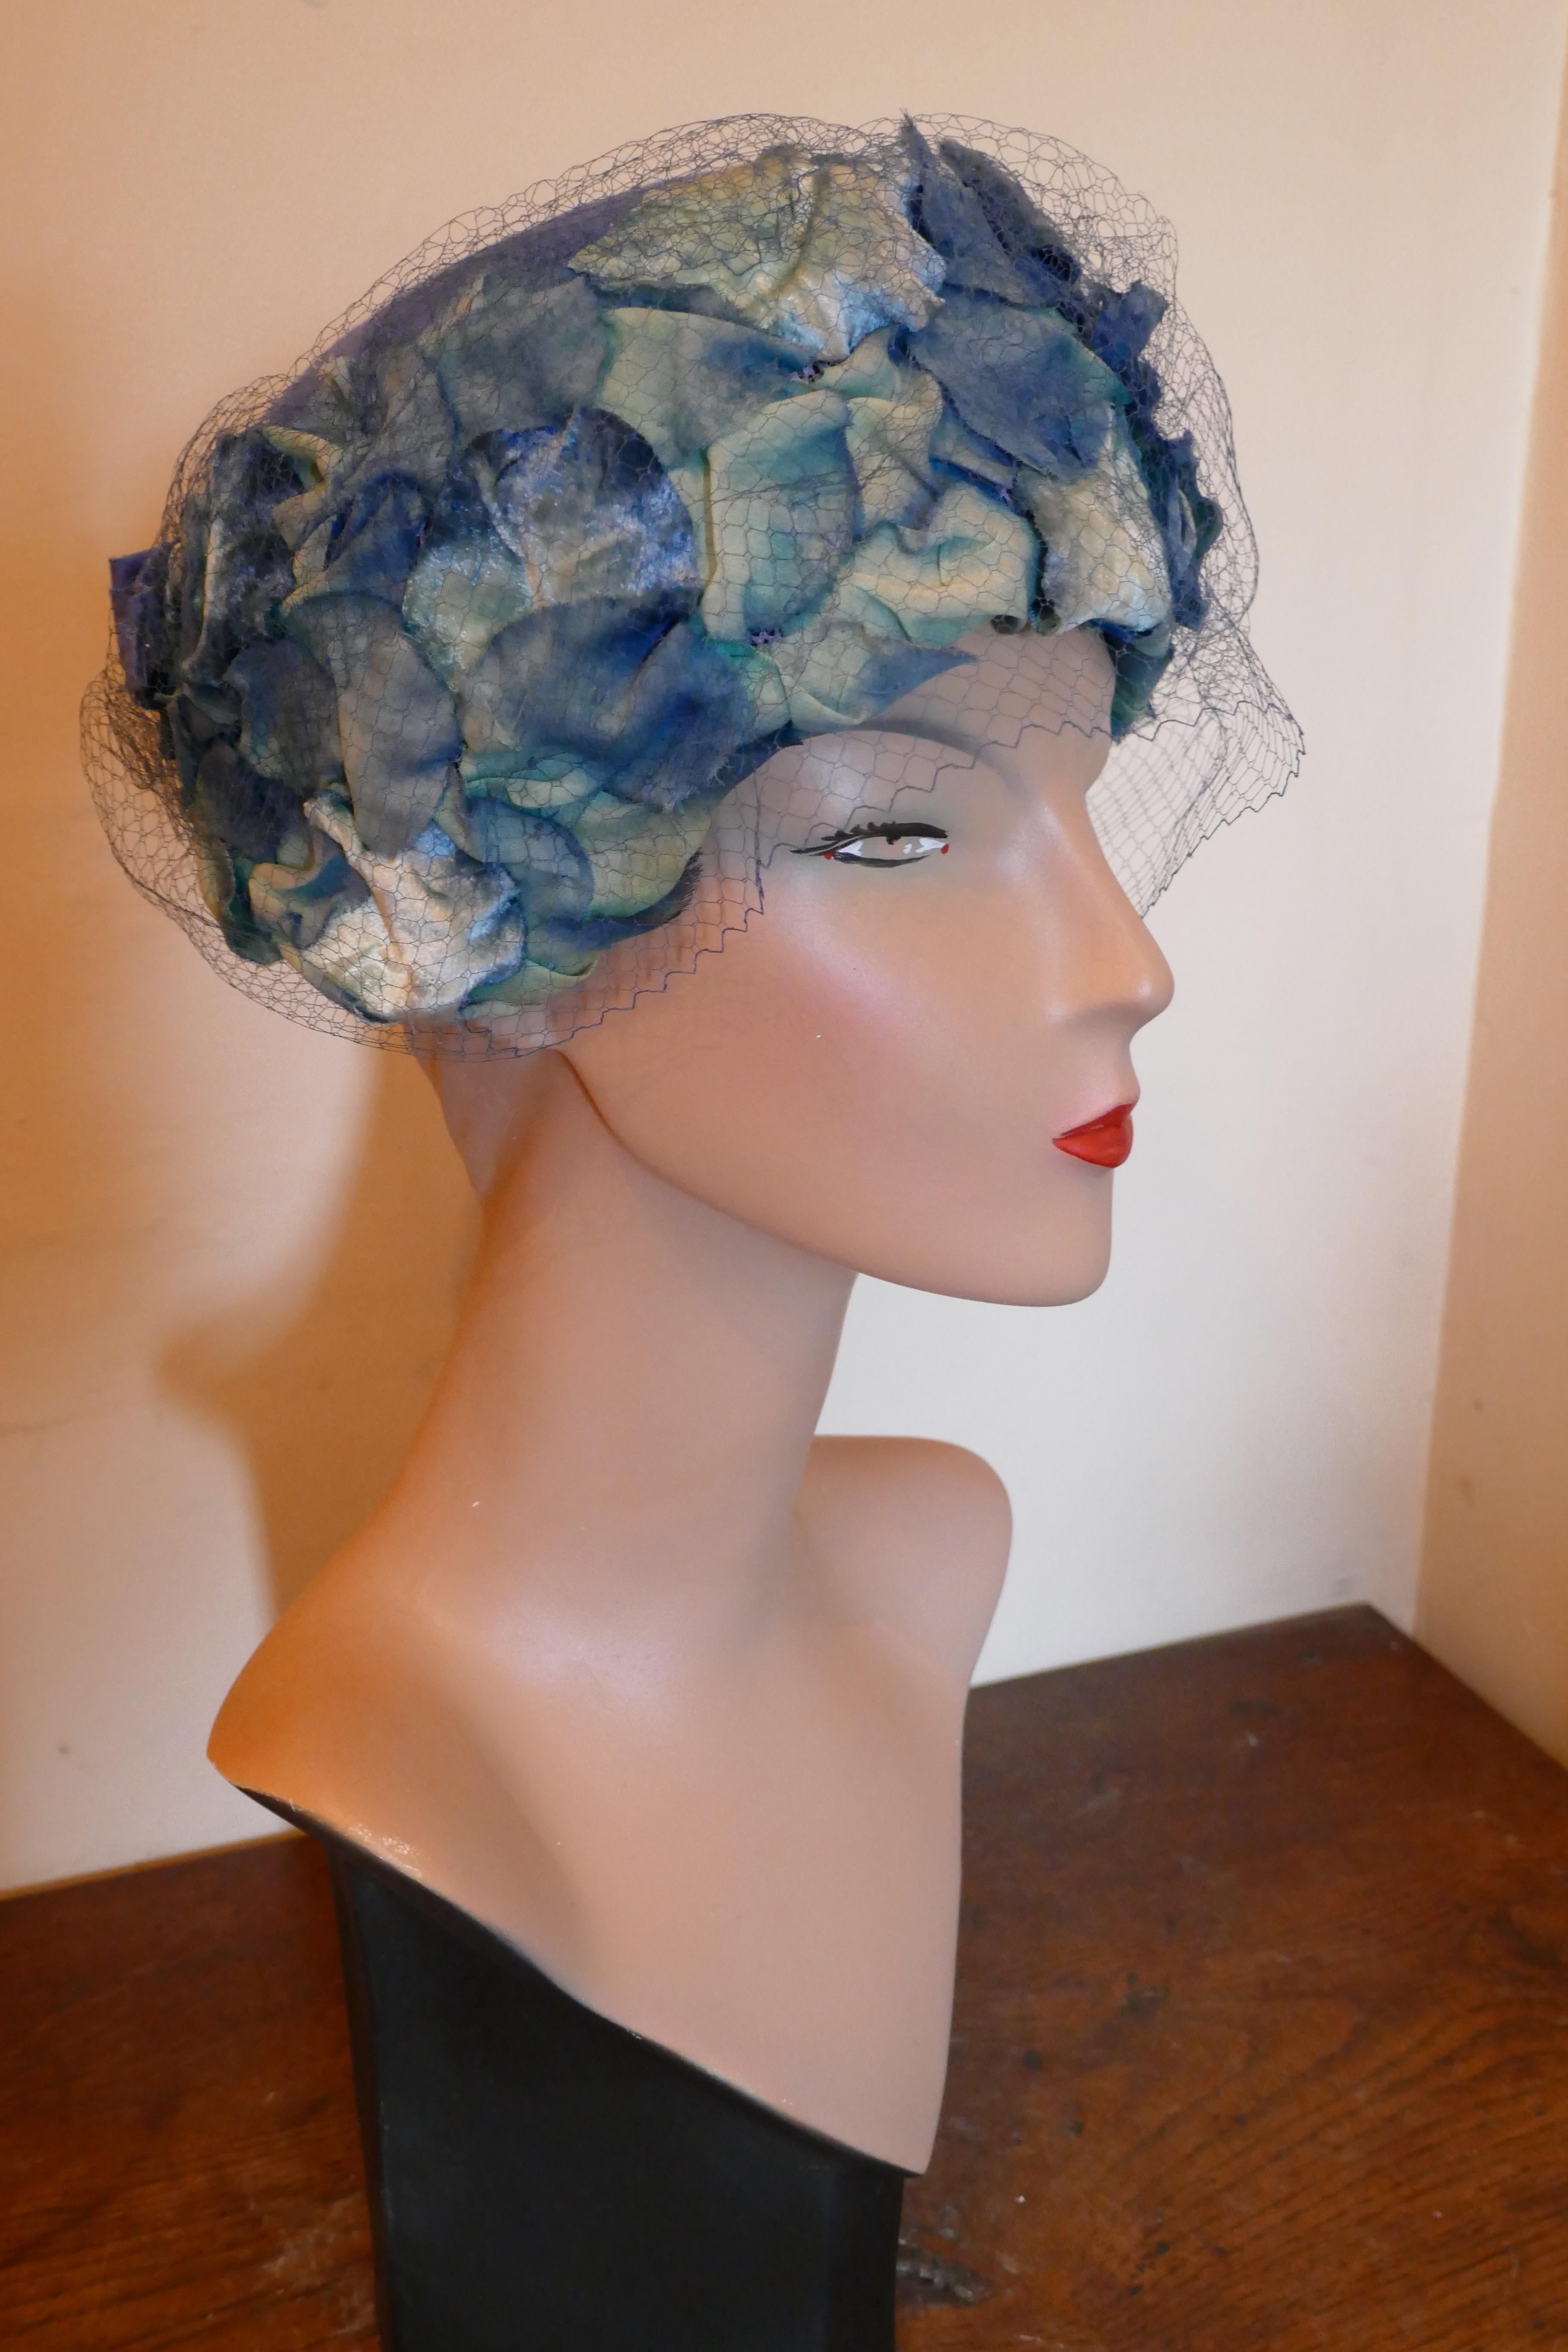 Gray Original 1950s Blue Pill Box Hat, Decorated with Roses and Veil, by Connor